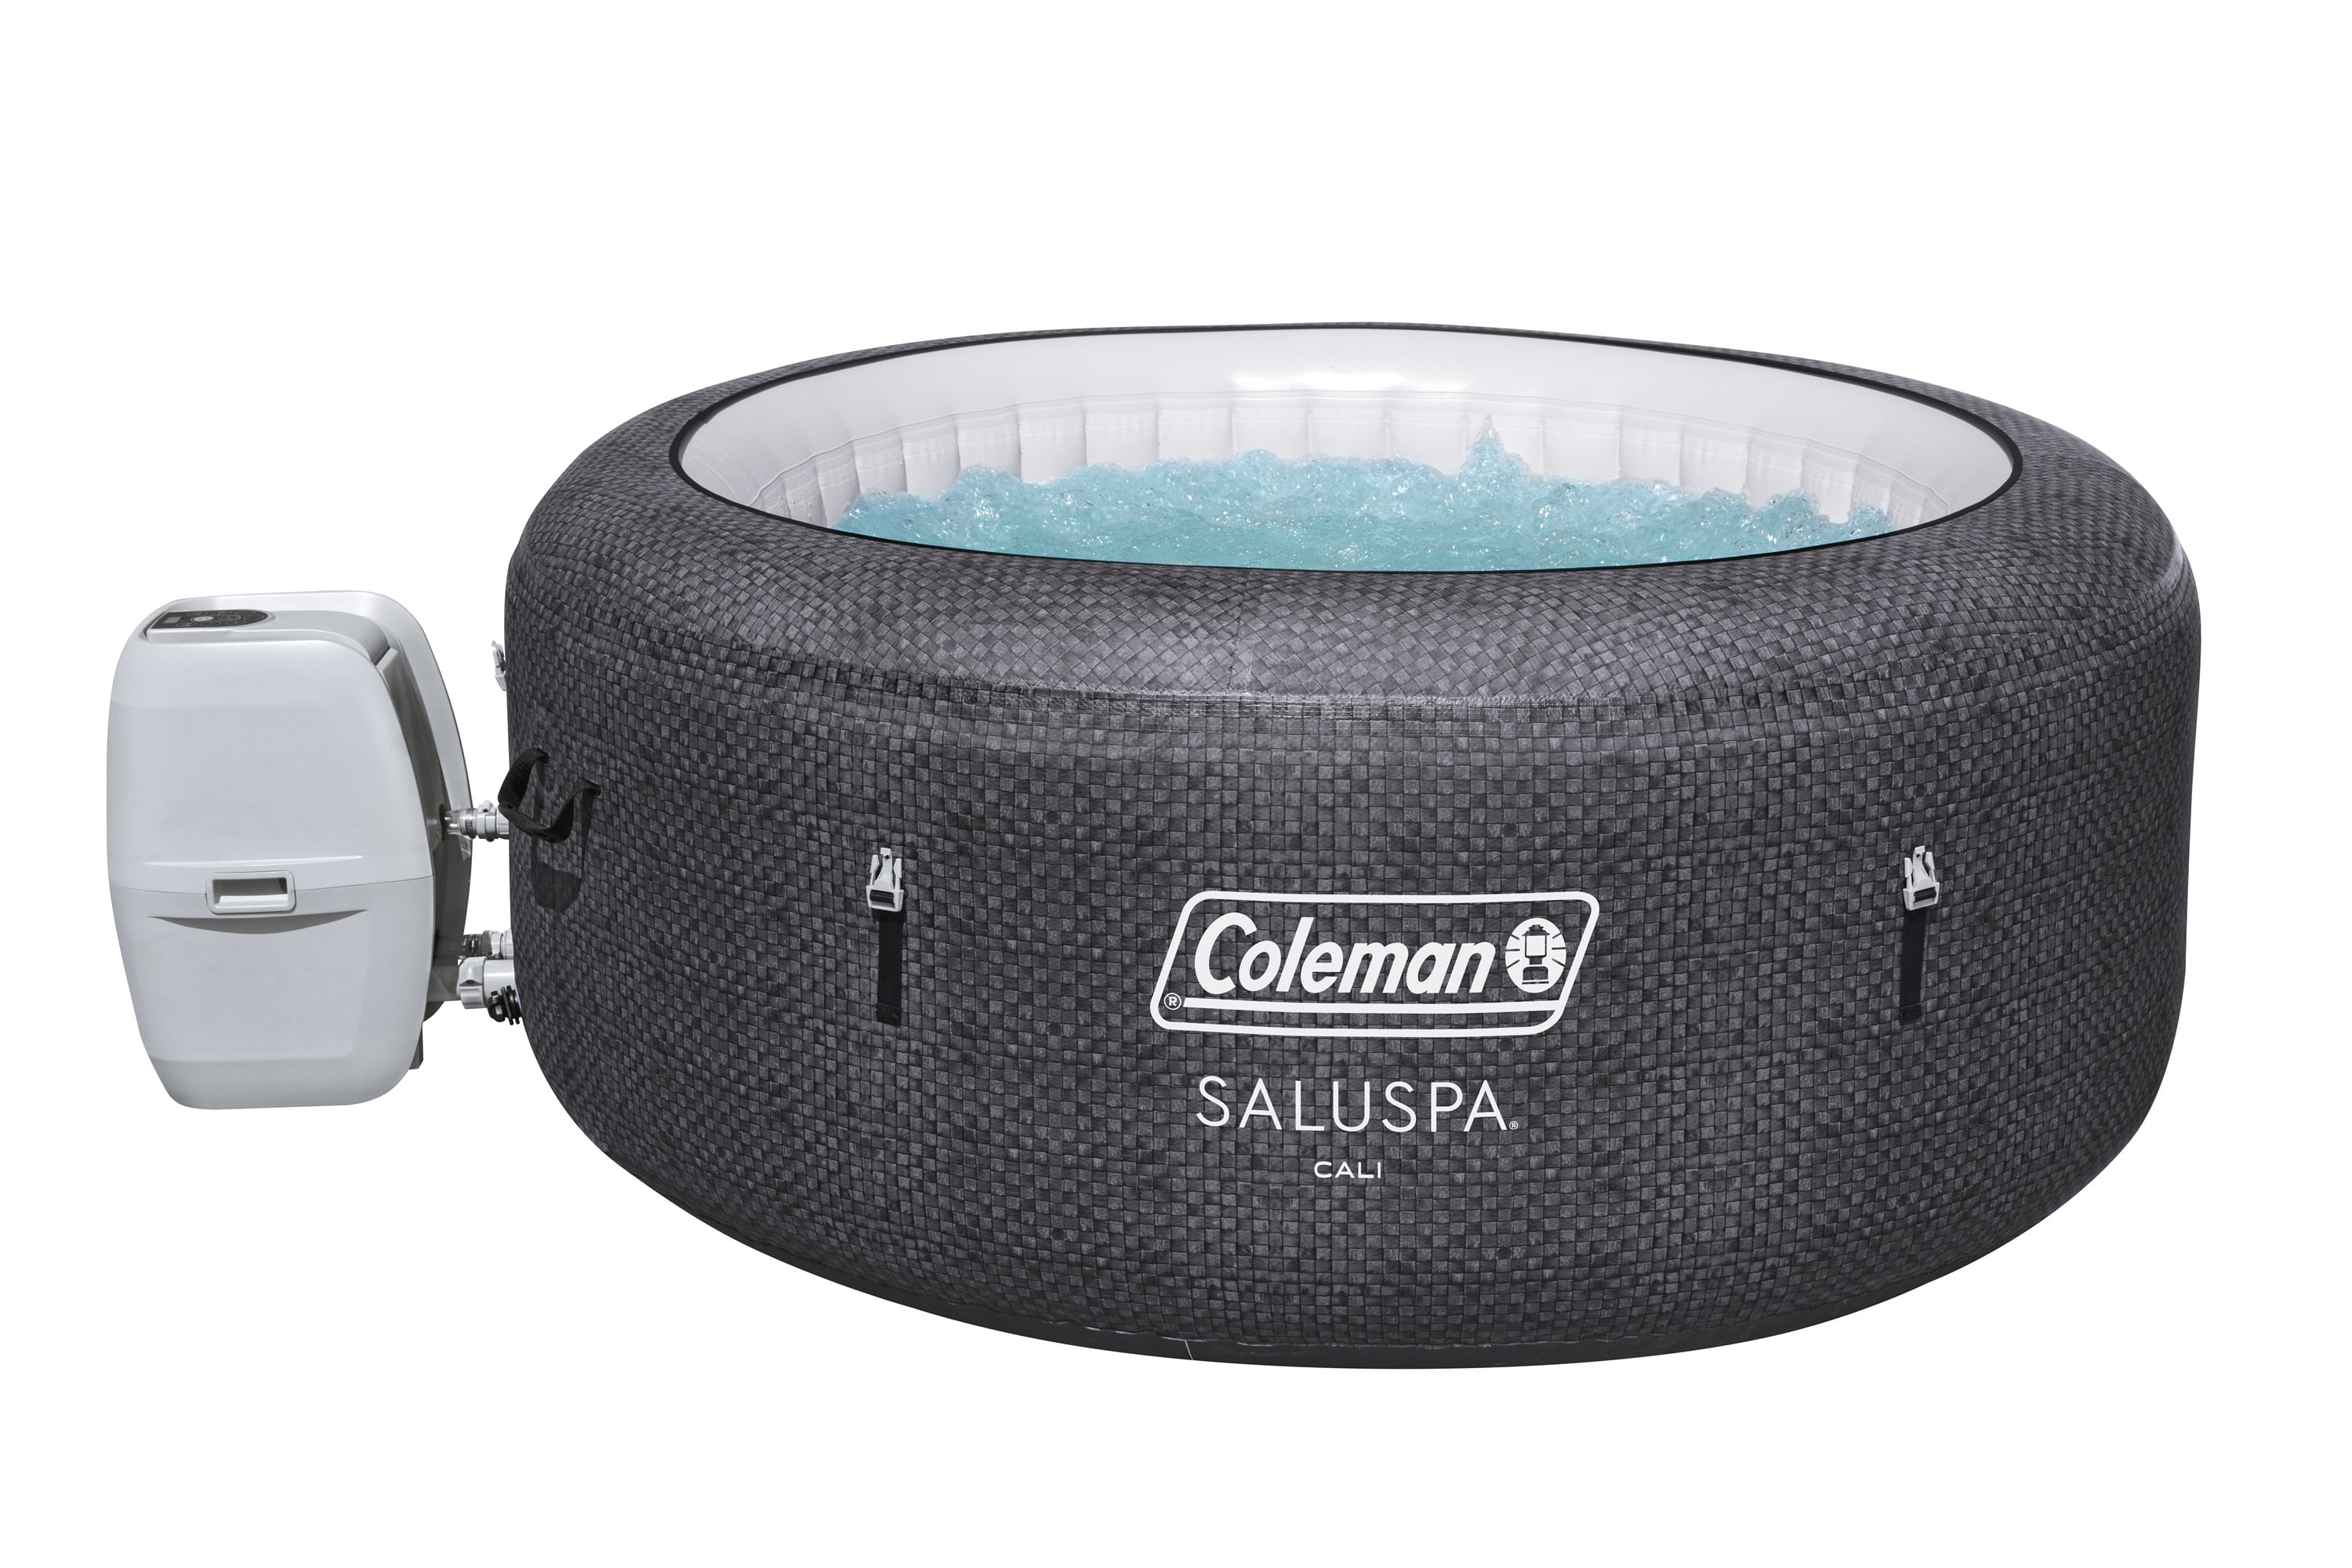 Coleman Cali AirJet 2-4 Person Inflatable Hot Tub Spa with EnergySense Liner